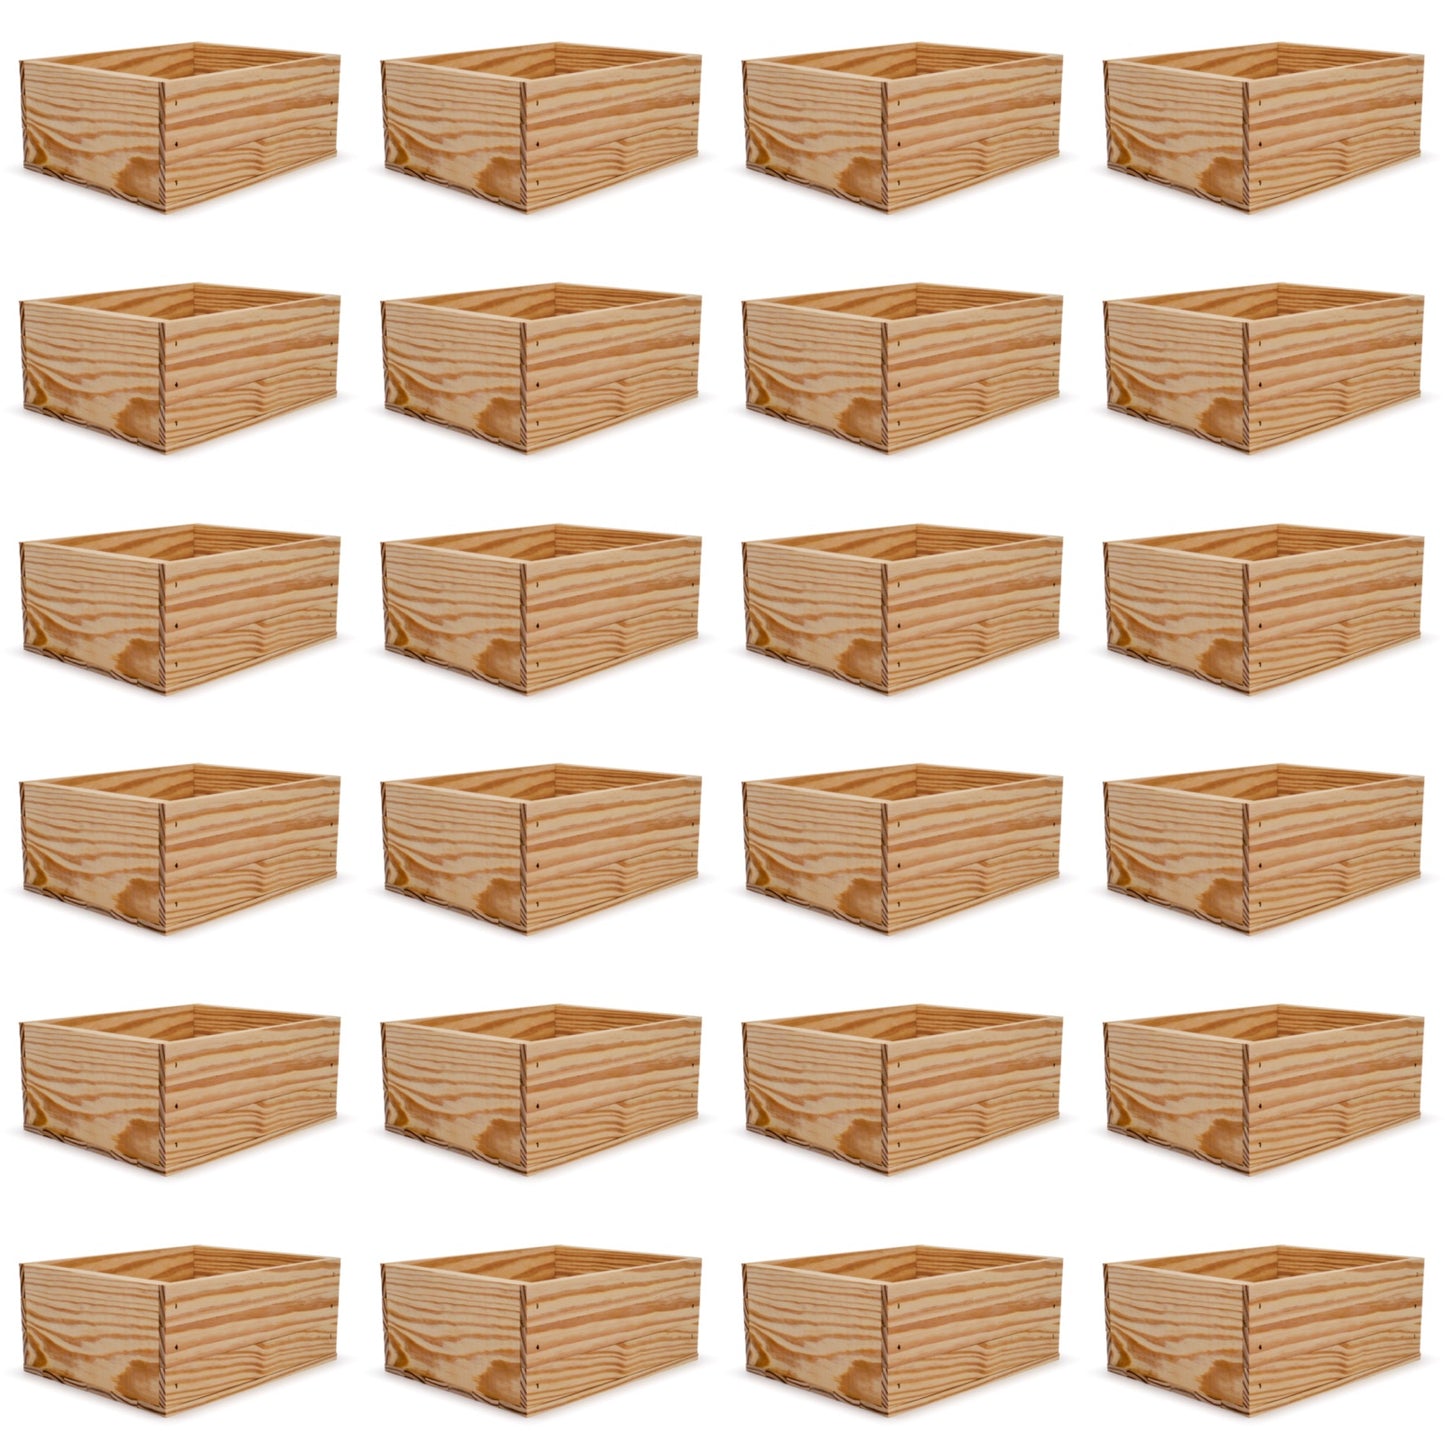 24 Small wooden crates 12x9.75x5.25